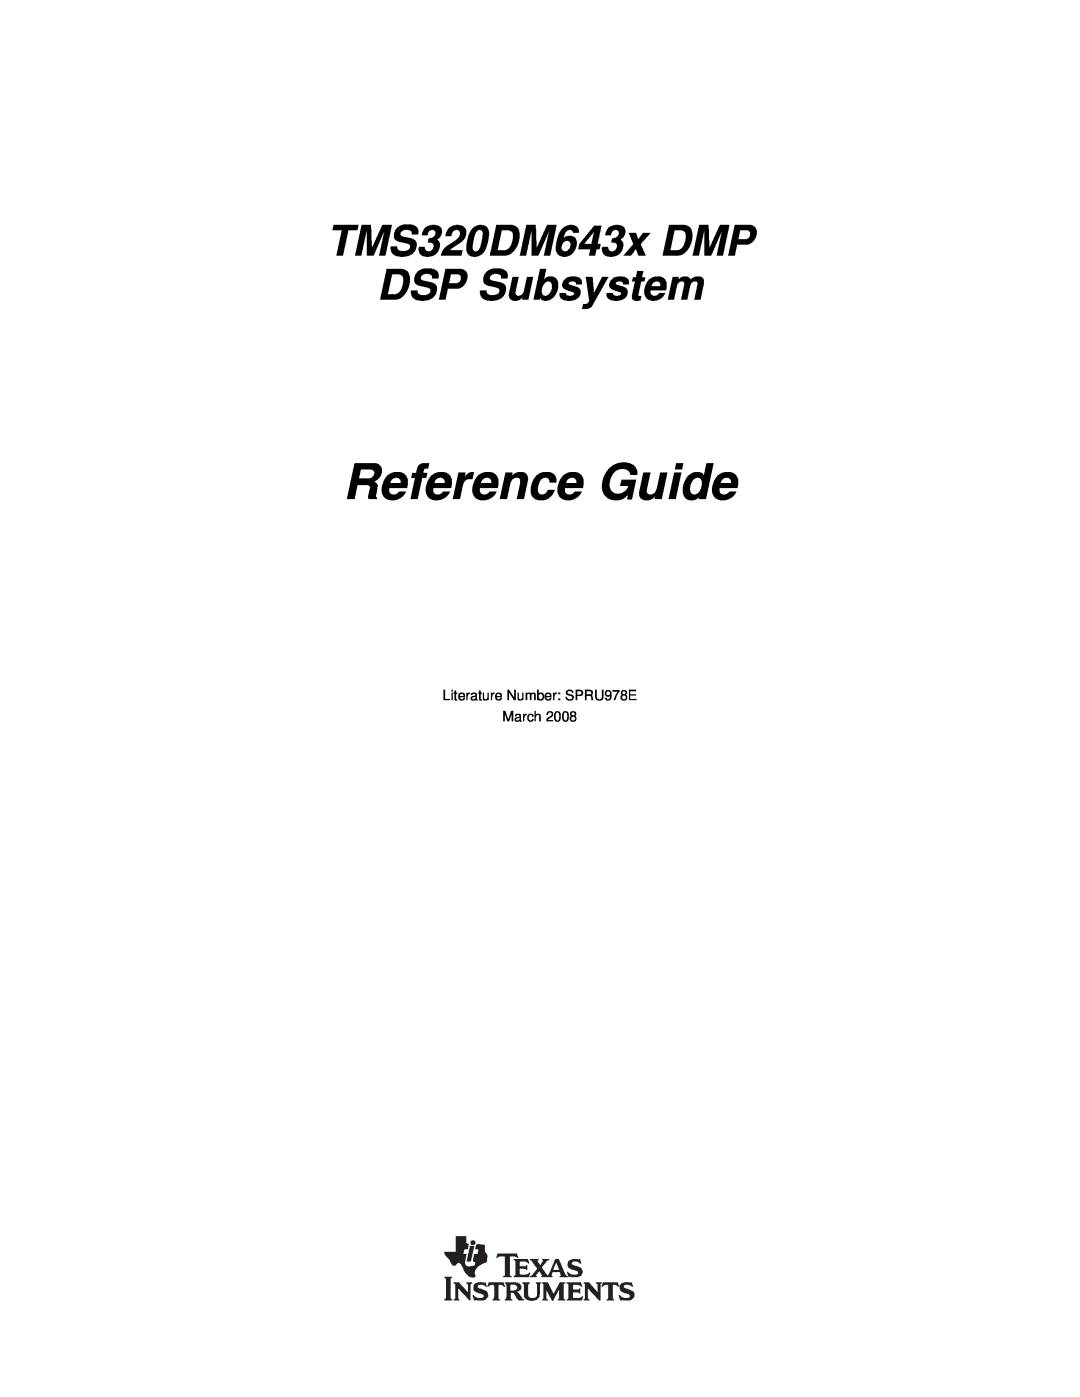 Texas Instruments manual Reference Guide, TMS320DM643x DMP DSP Subsystem 